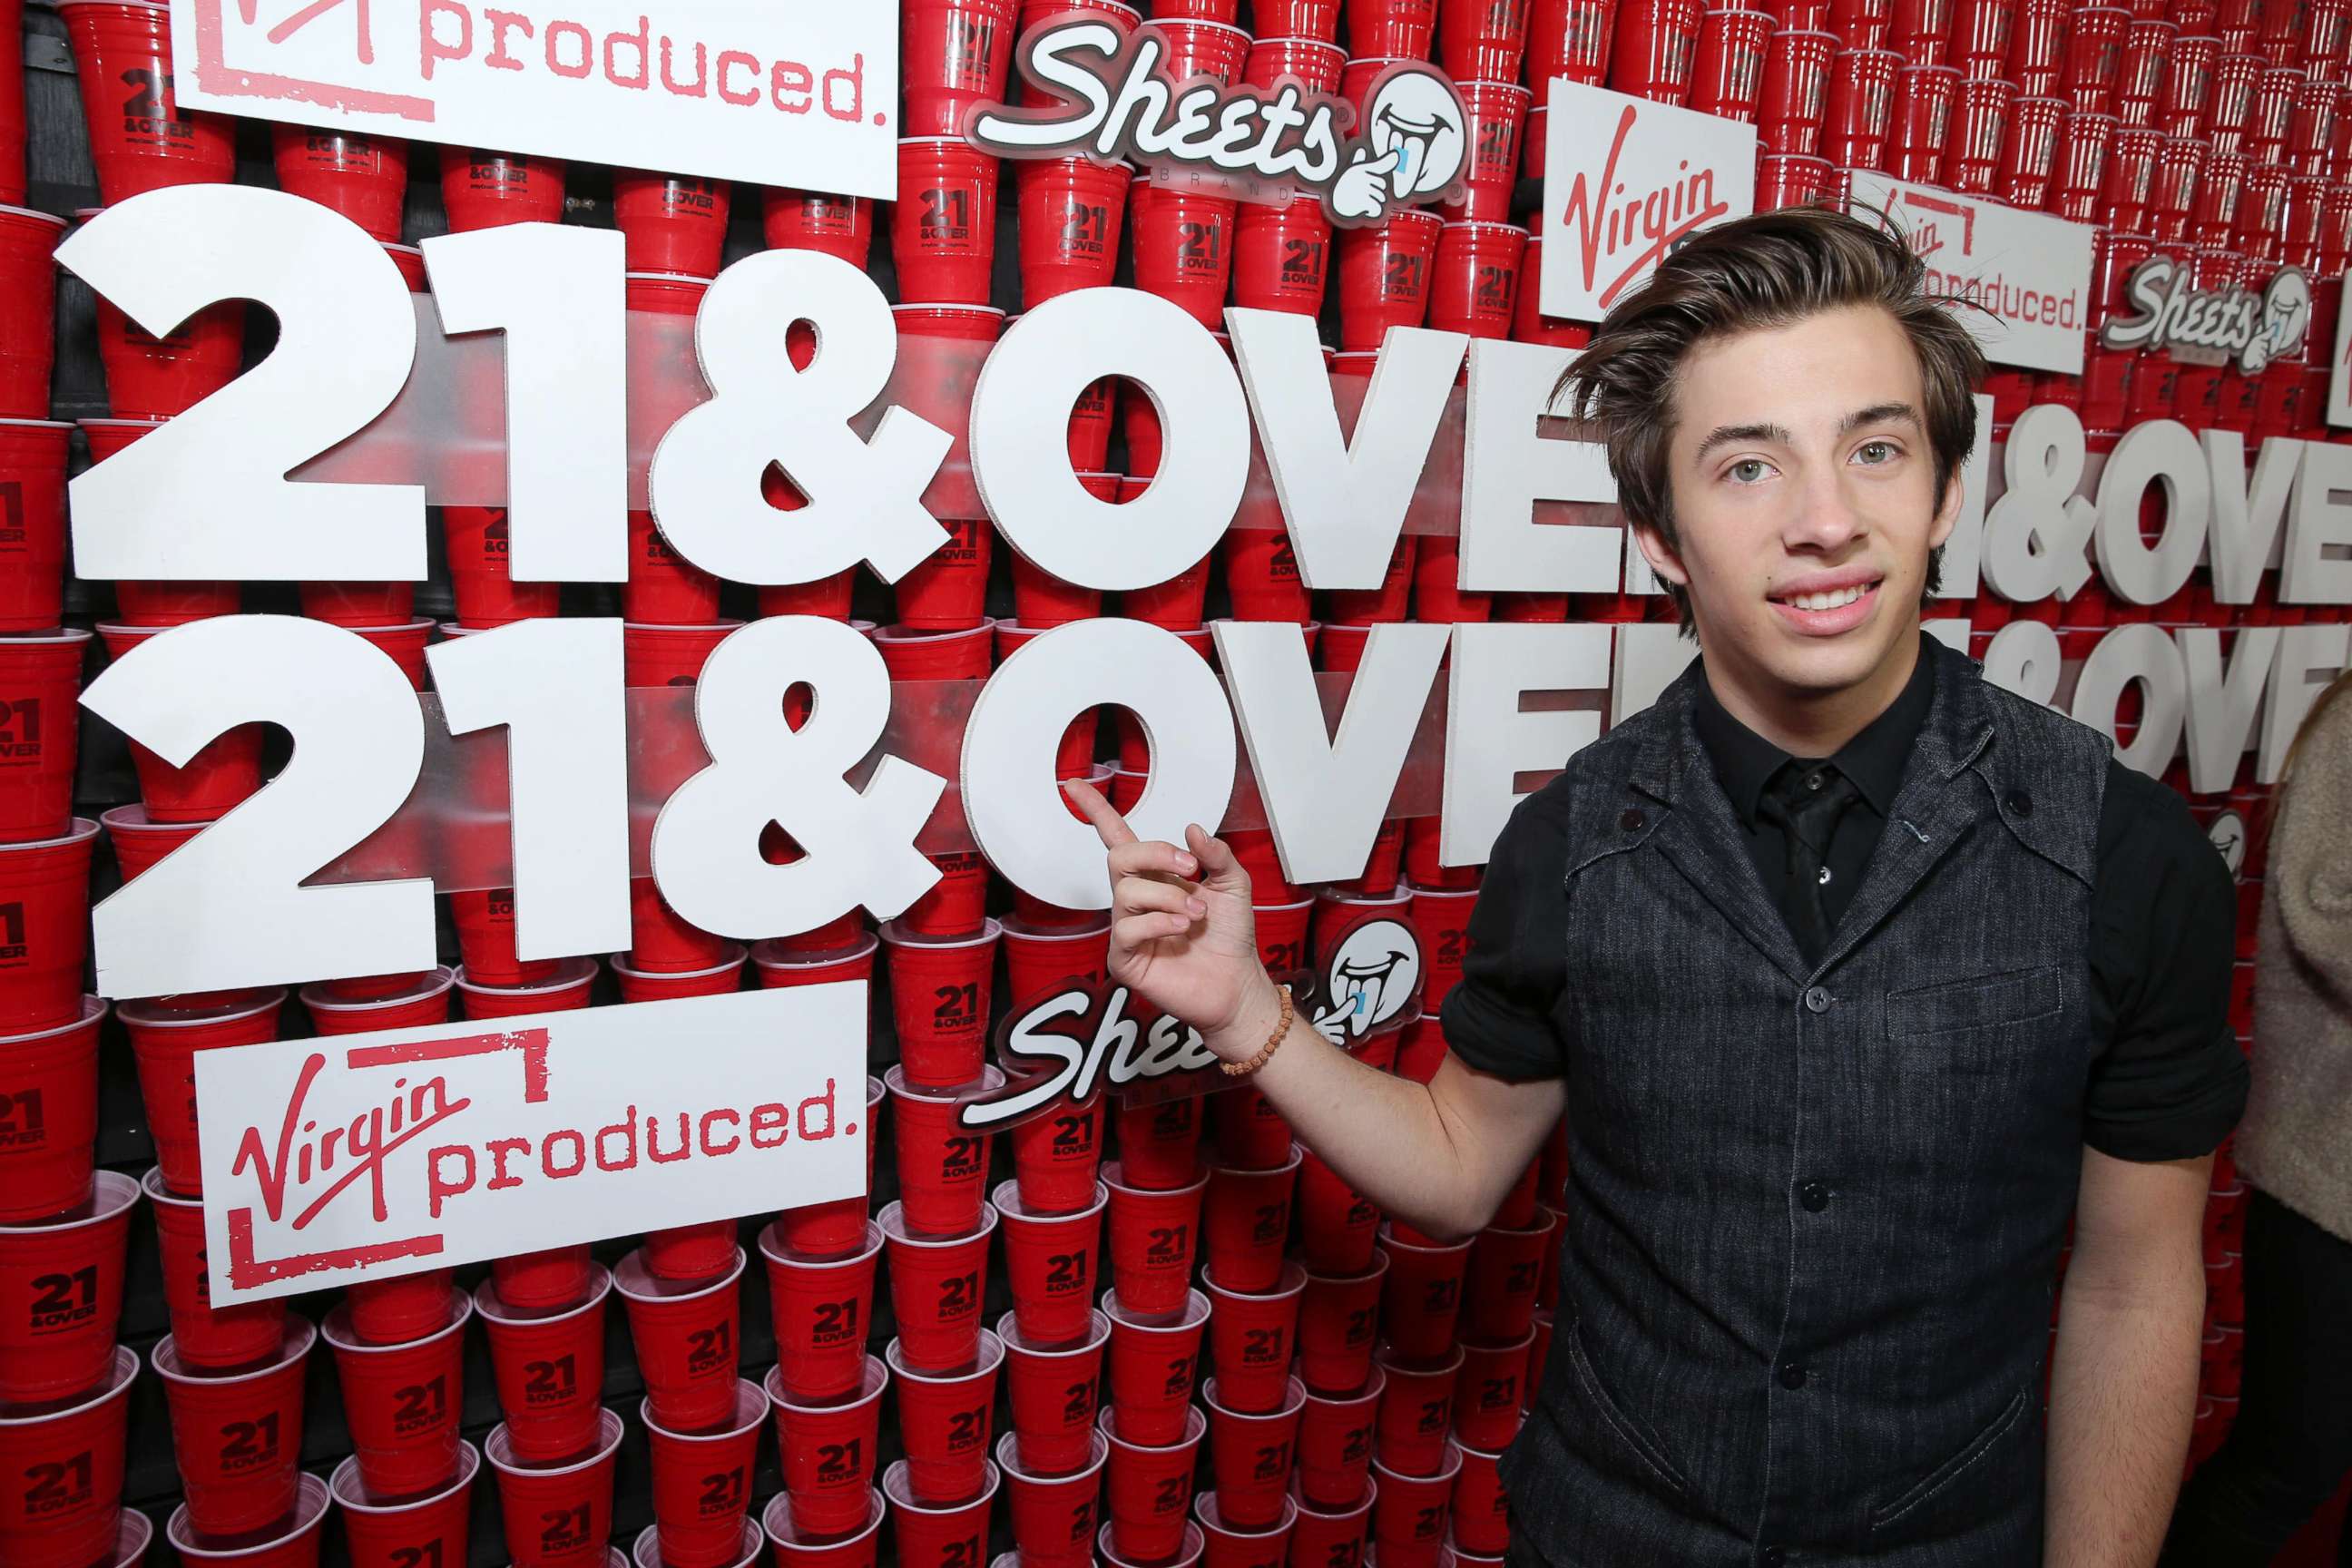 PHOTO: Actor Jimmy Bennett attends Relativity Media's '21 and Over' premiere at Westwood Village Theatre on February 21, 2013 in Westwood, California.